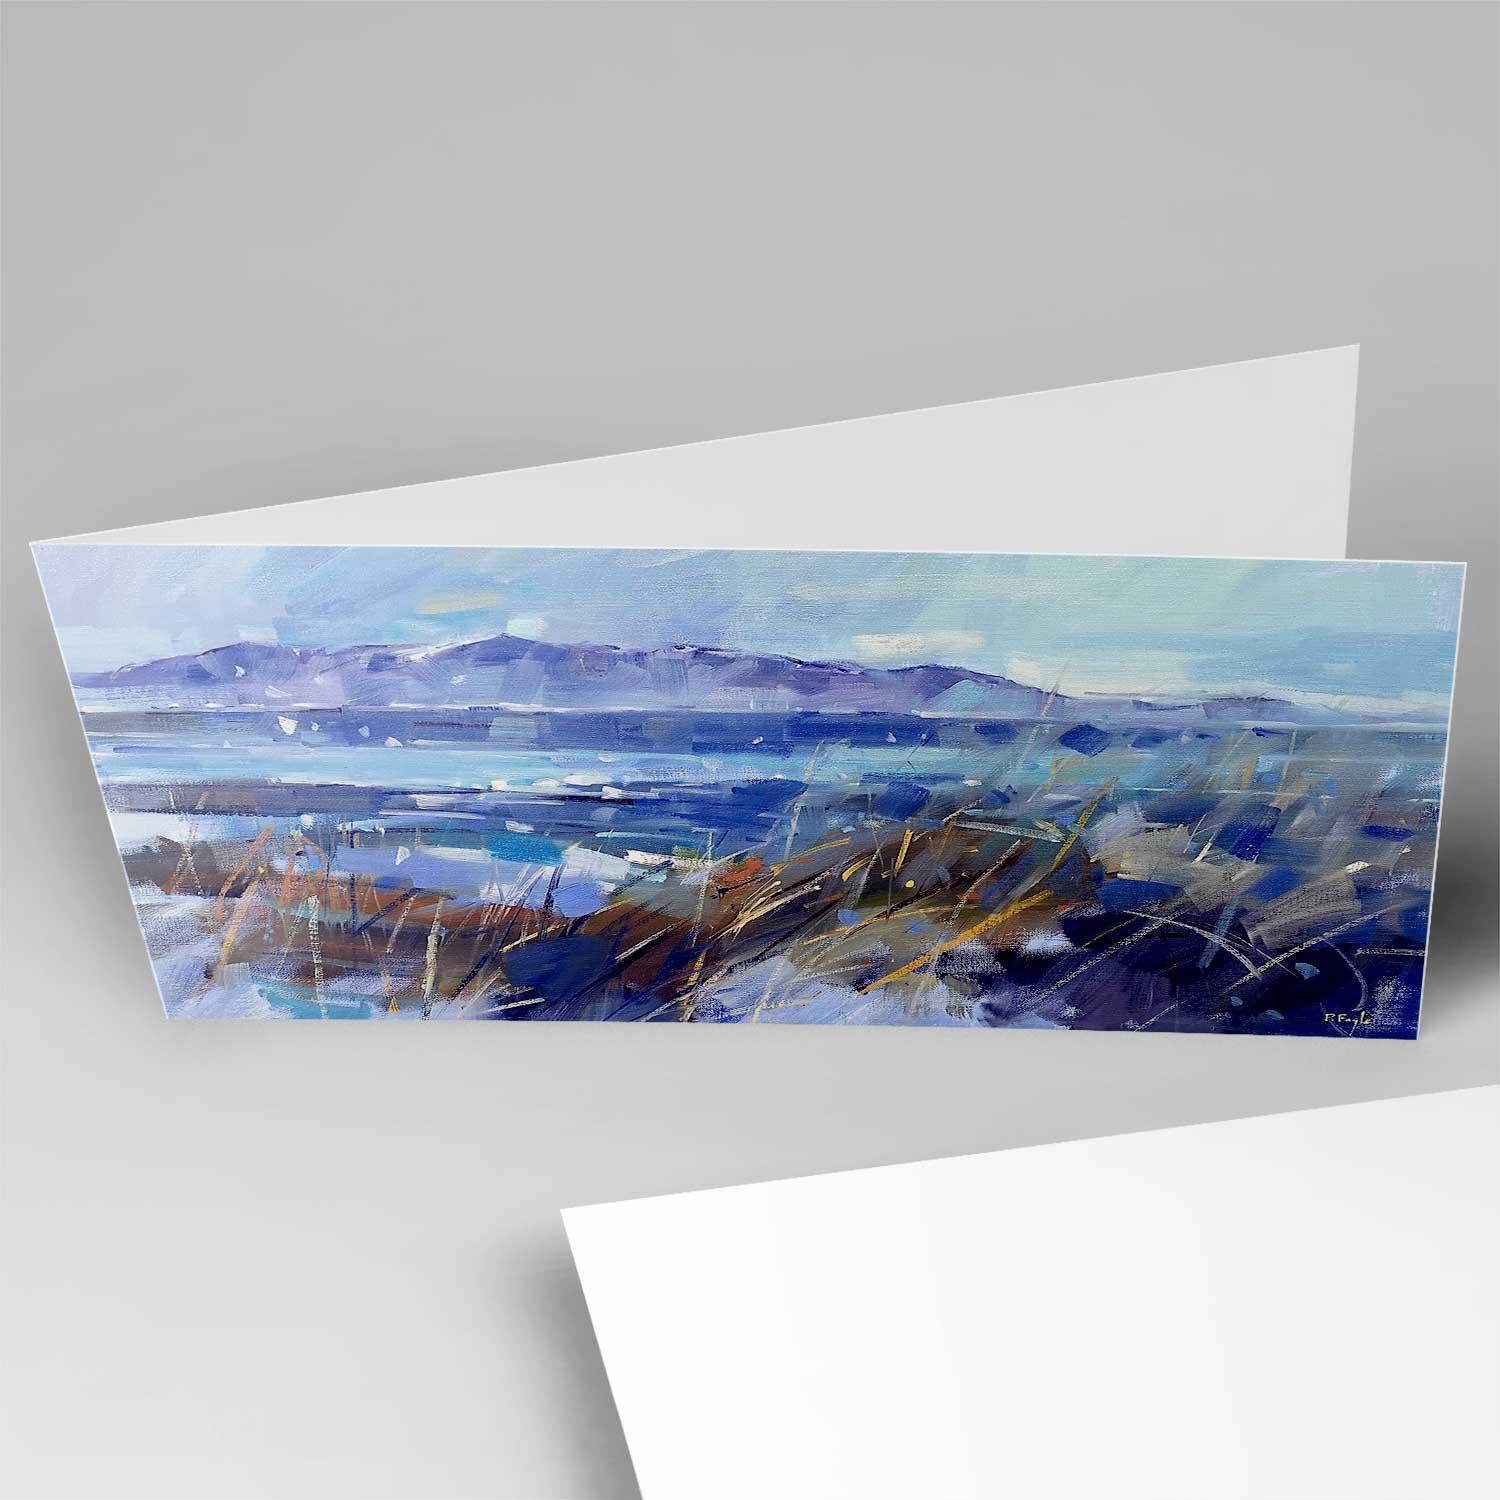 Winter Arran Greeting Card from an original painting by artist Peter Foyle